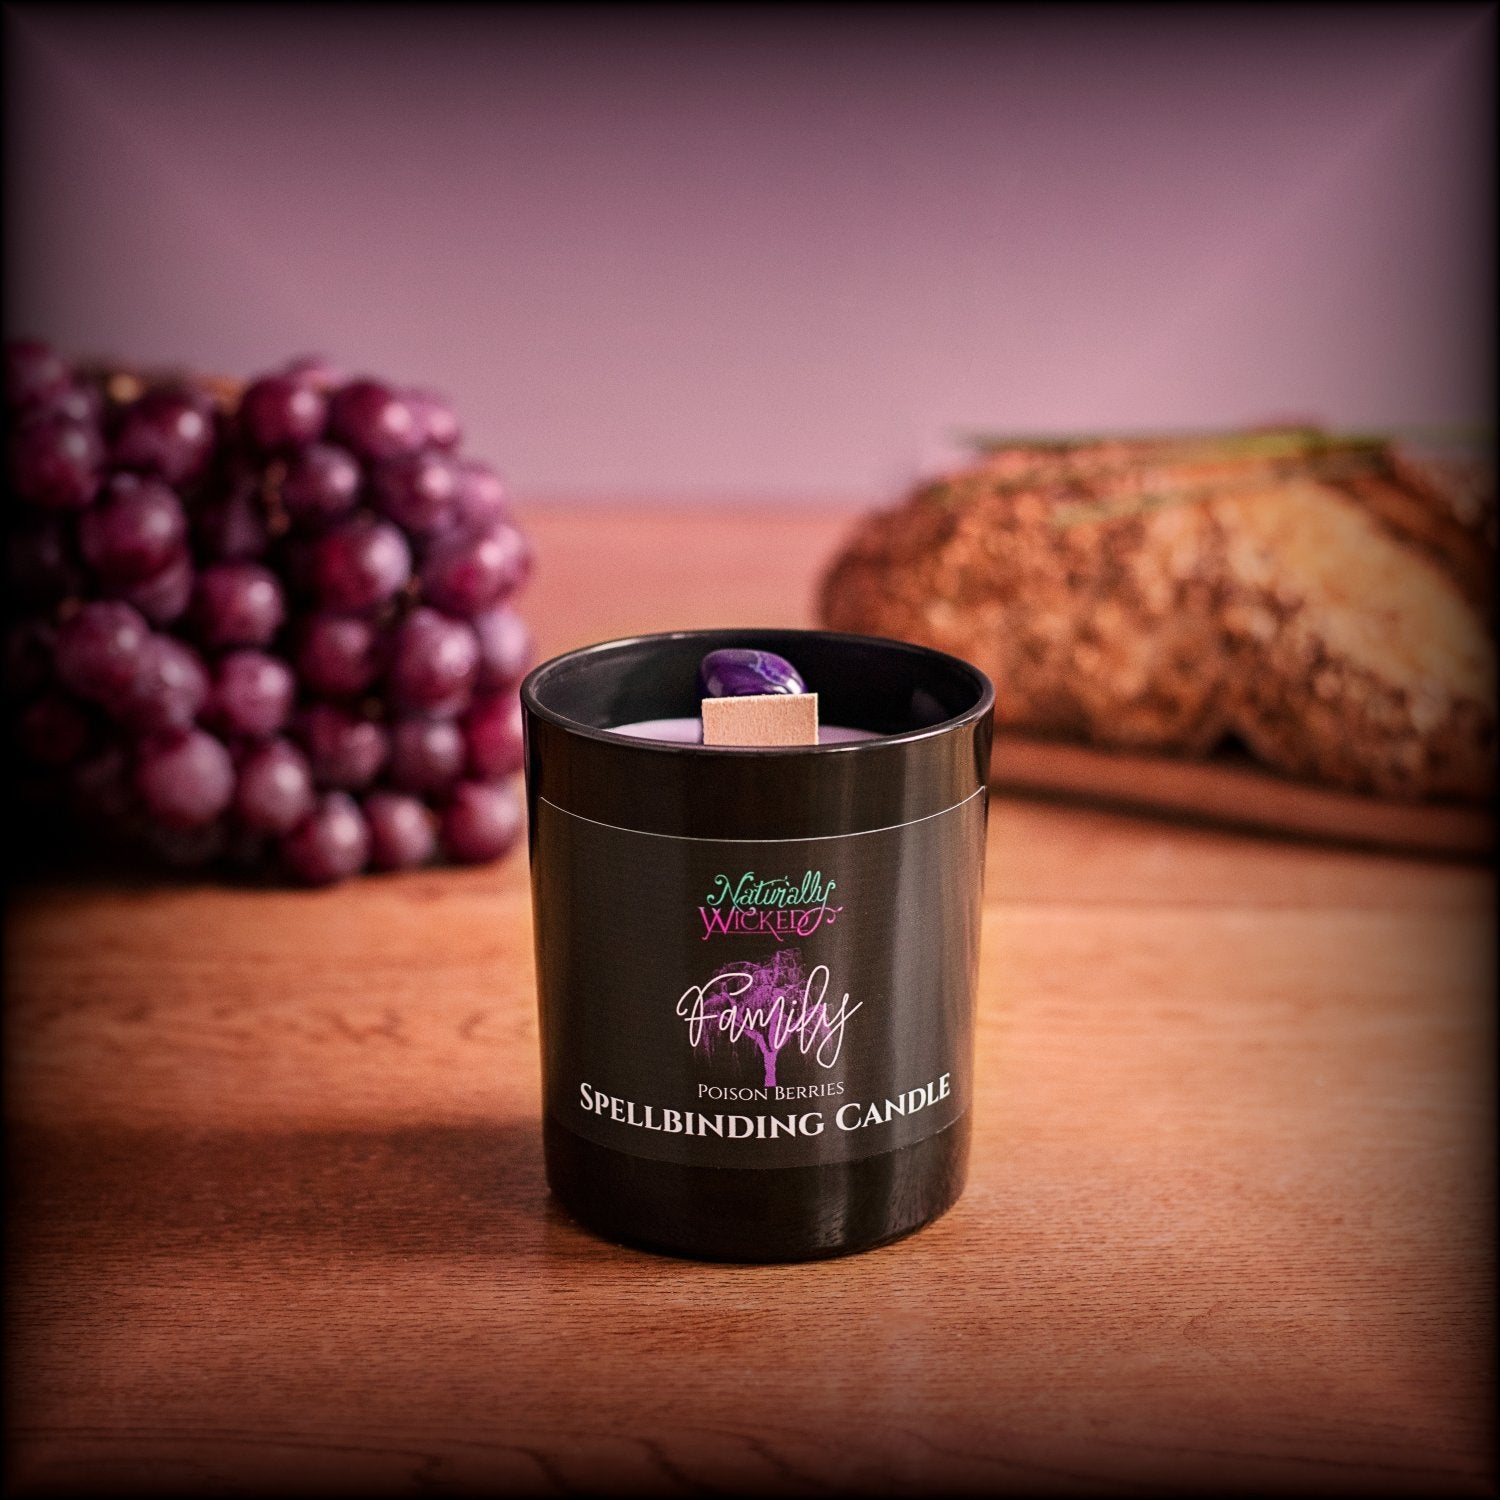 Naturally Wicked Spellbinding Family Candle With Bright Purple Family Crystal Sits In Front Of Purple Grapes & Home Cooked Bread